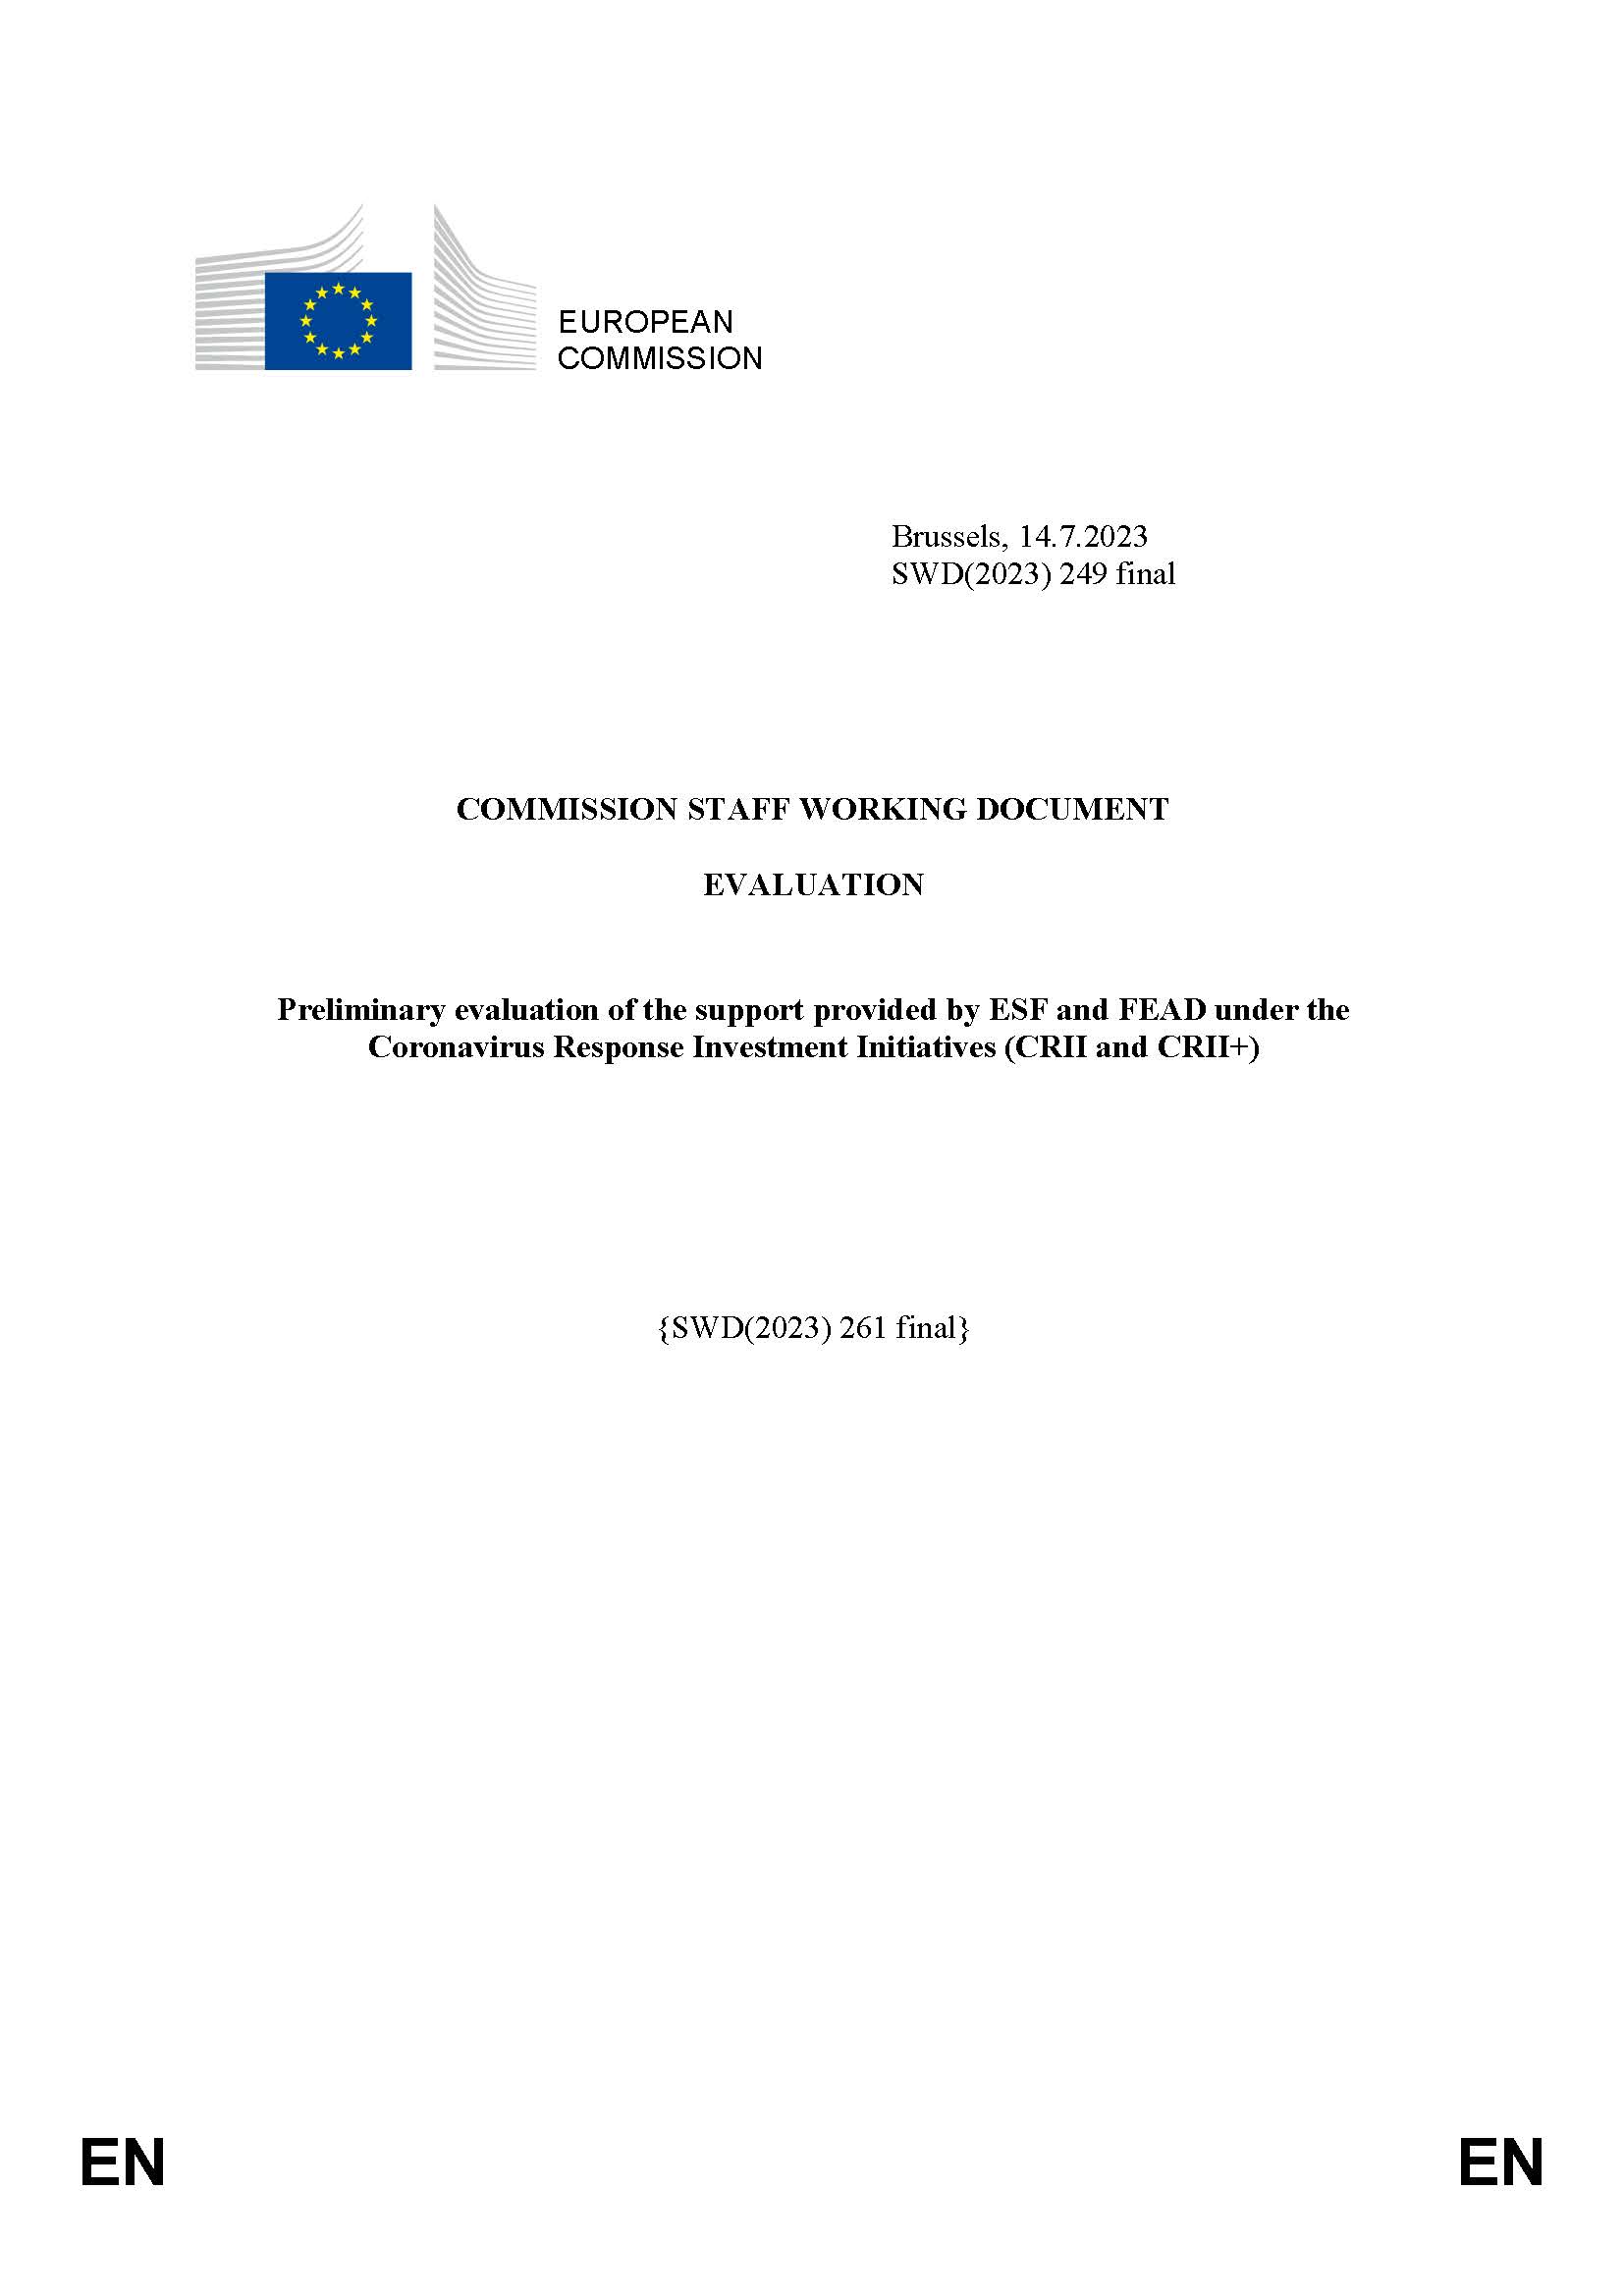 Commission Staff Working Document - Preliminary evaluation of the support provided by ESF and FEAD under the
Coronavirus Response Investment Initiatives (CRII and CRII+)